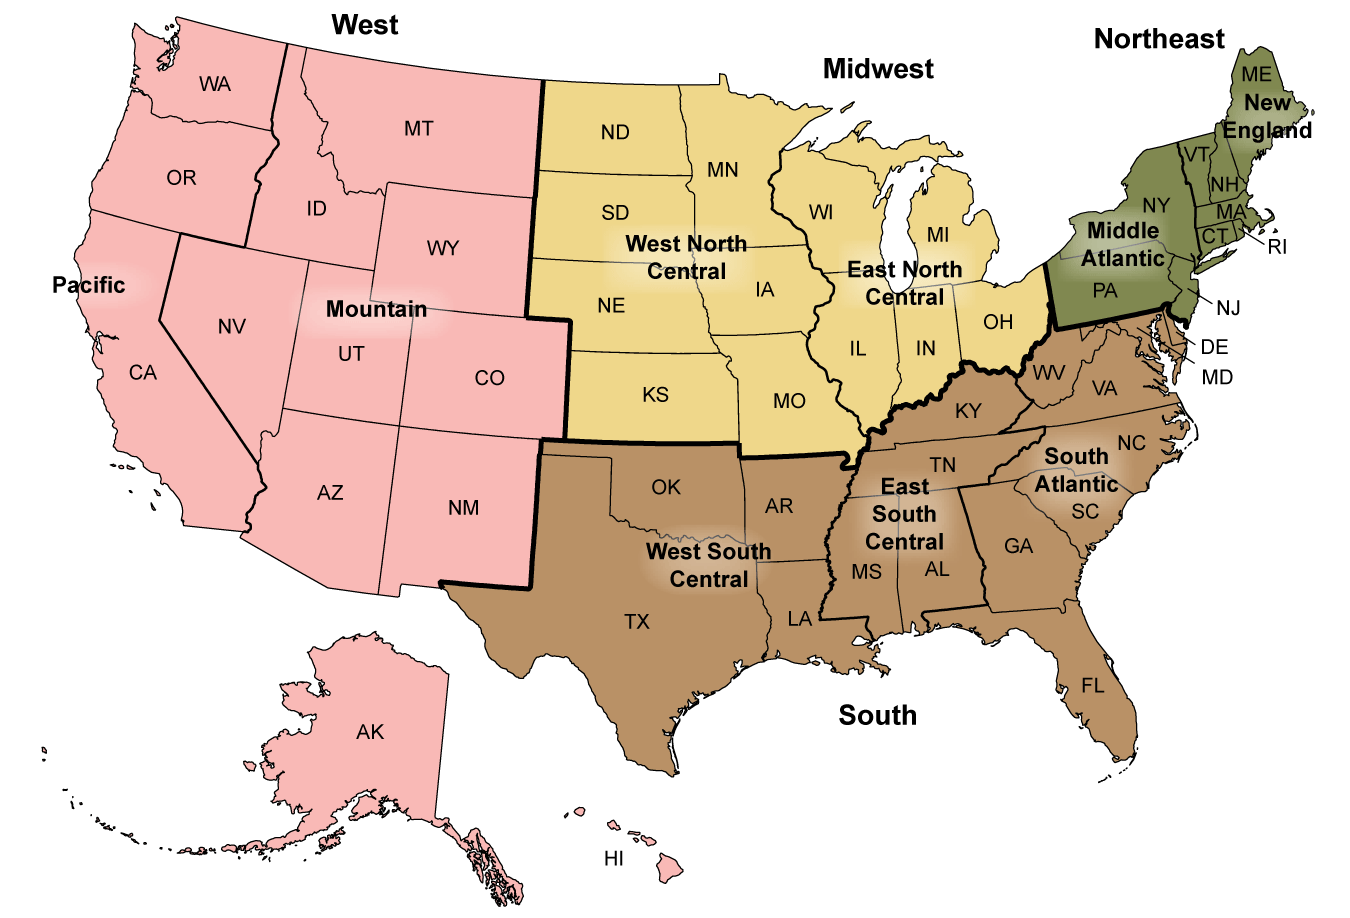 Figure is a map of the United States showing the U.S. Census Bureau’s four geographic regions (Northeast, Midwest, South, and West) and nine divisions (New England, Middle Atlantic, South Atlantic, East South Central, West South Central, East North Central, West North Central, Mountain, and Pacific).